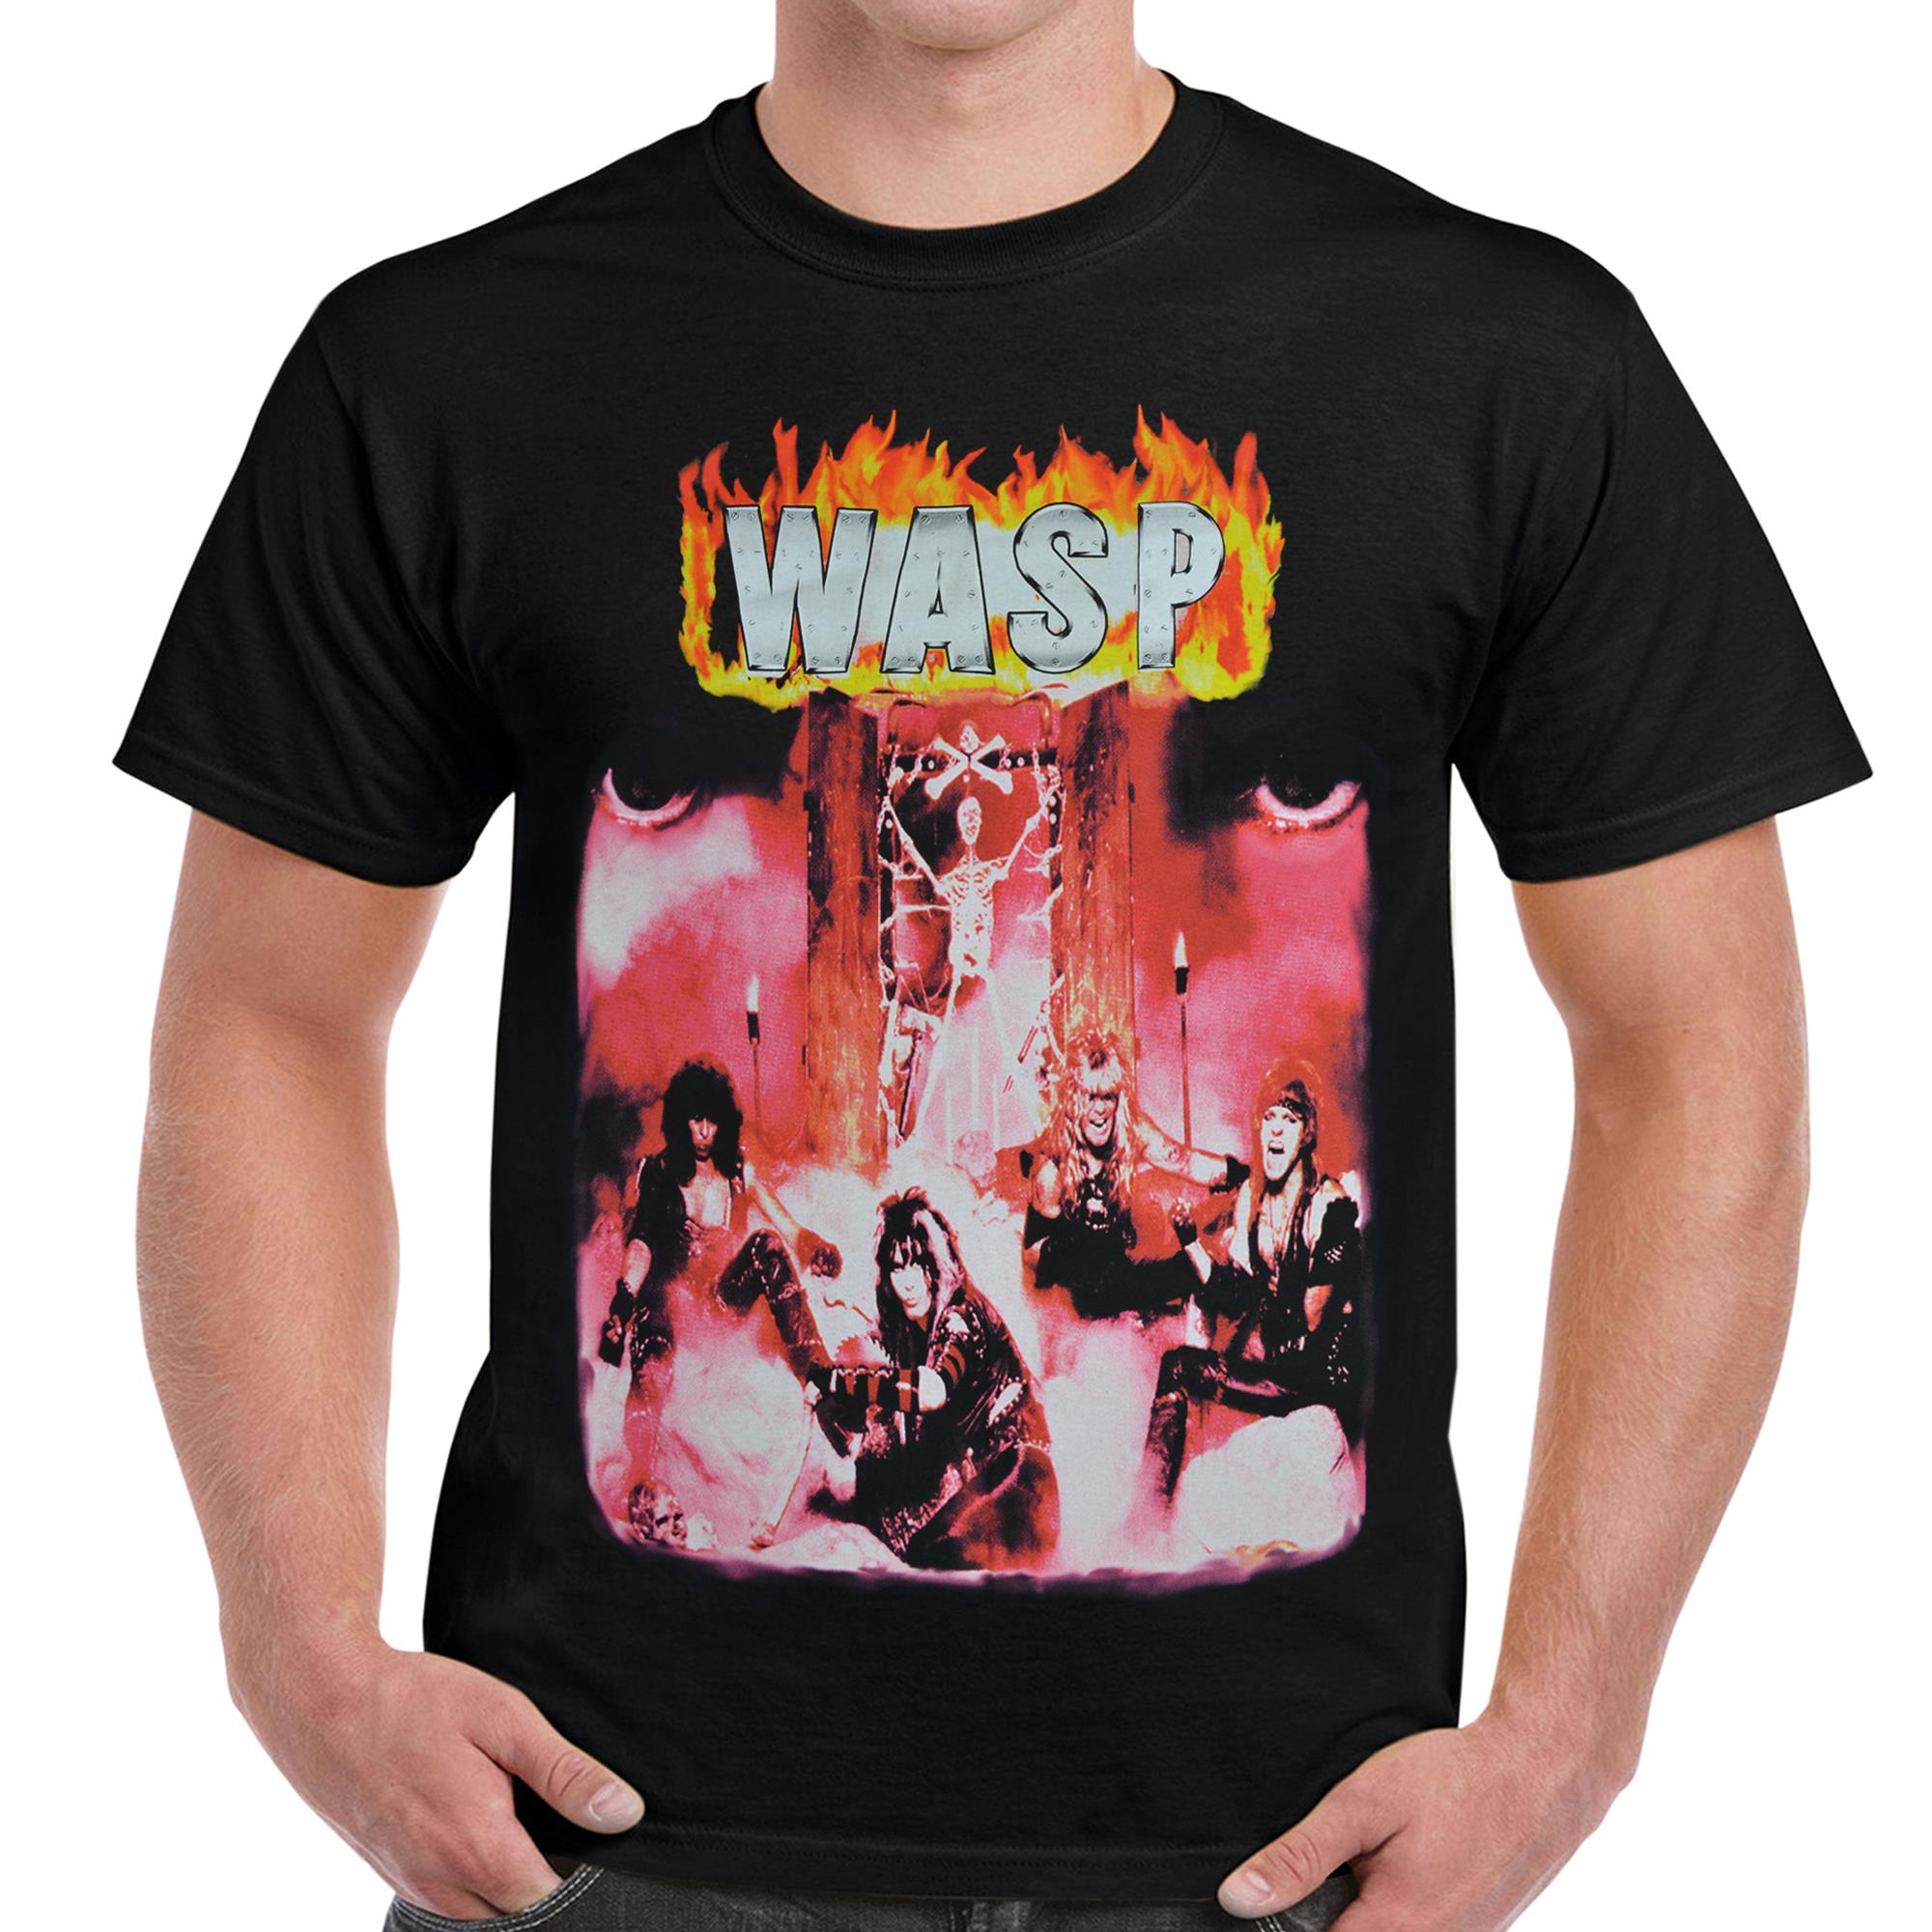 CROSSBONES Metal Rock Band Men's White T-Shirt Size S-3XL New WASP W.A.S.P